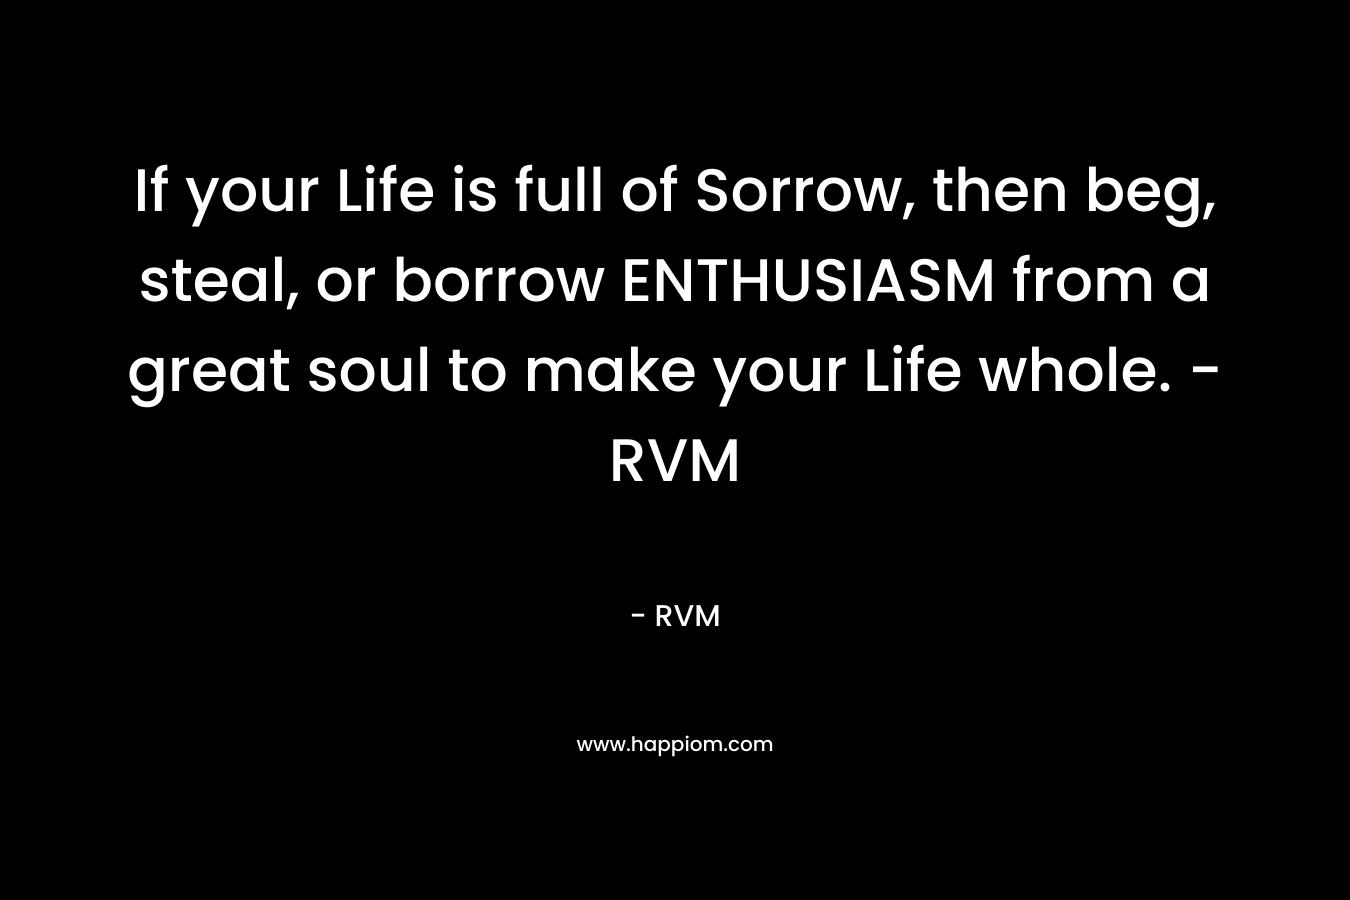 If your Life is full of Sorrow, then beg, steal, or borrow ENTHUSIASM from a great soul to make your Life whole. -RVM